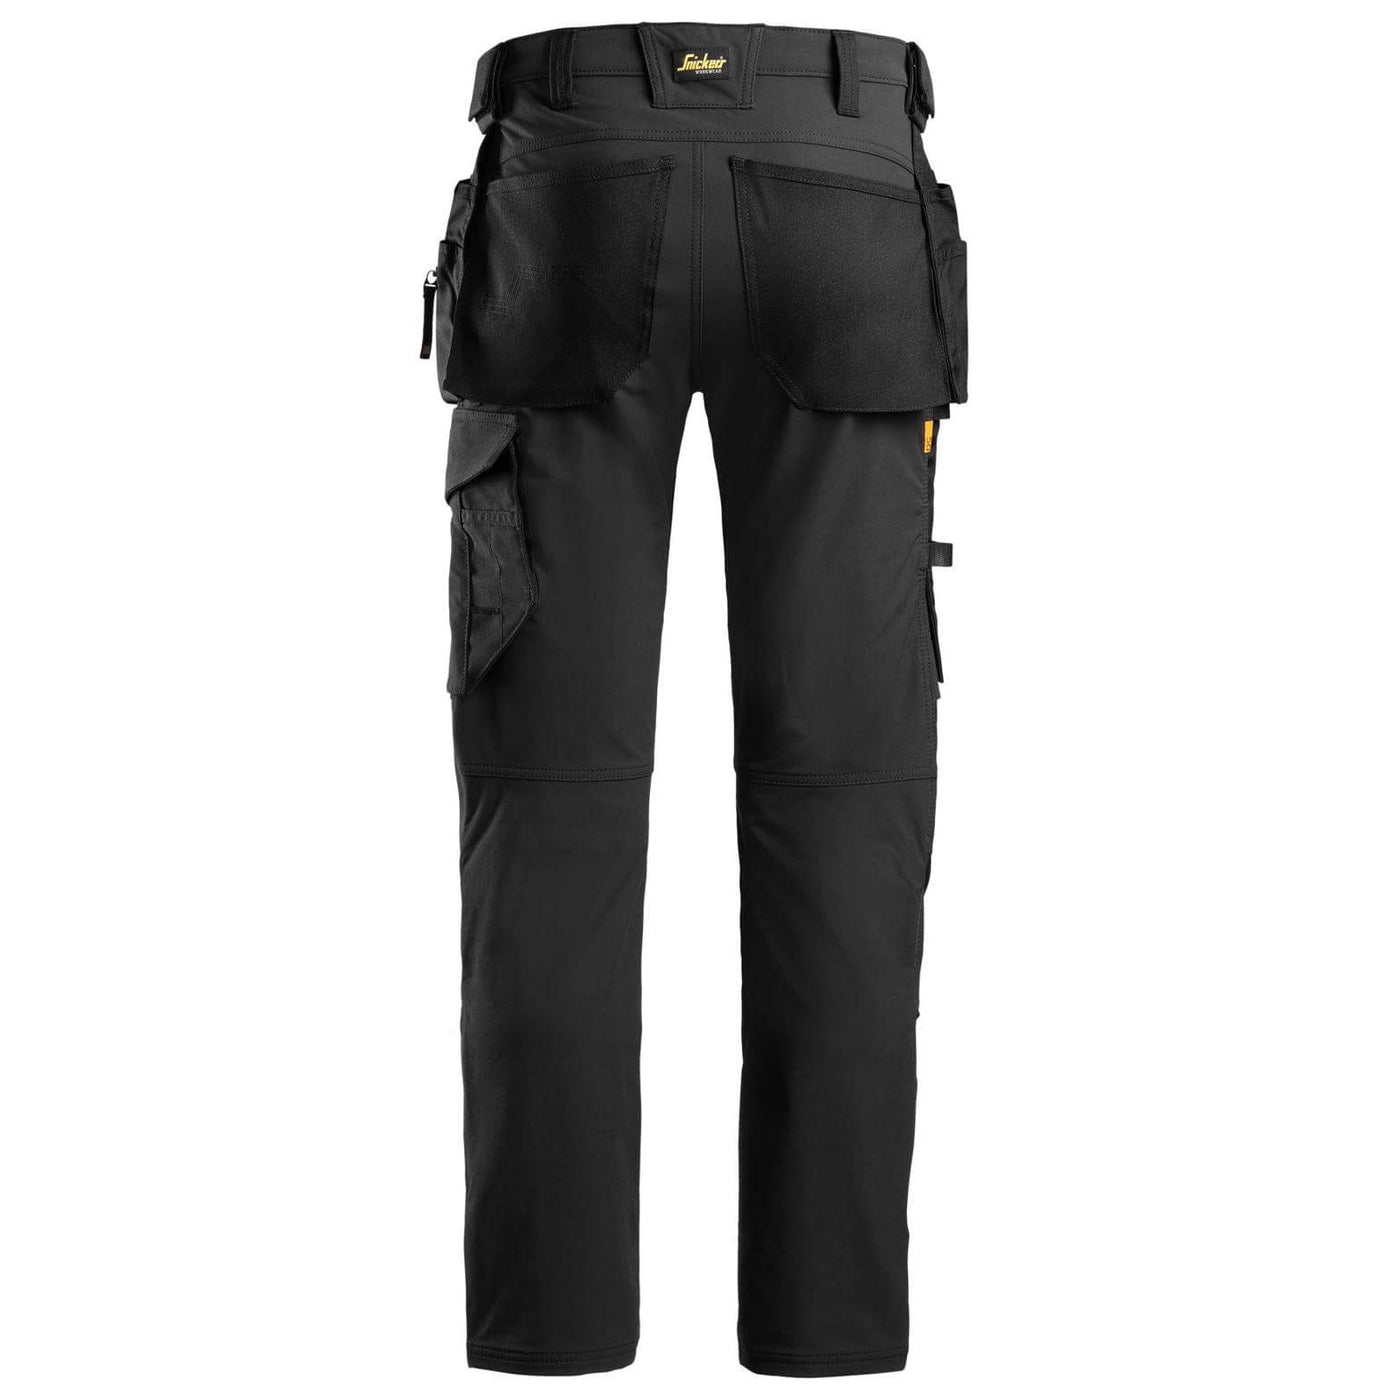 Snickers 6271 AllroundWork Full Stretch Slim Fit Trousers with Holster Pockets Black Black back #colour_black-black